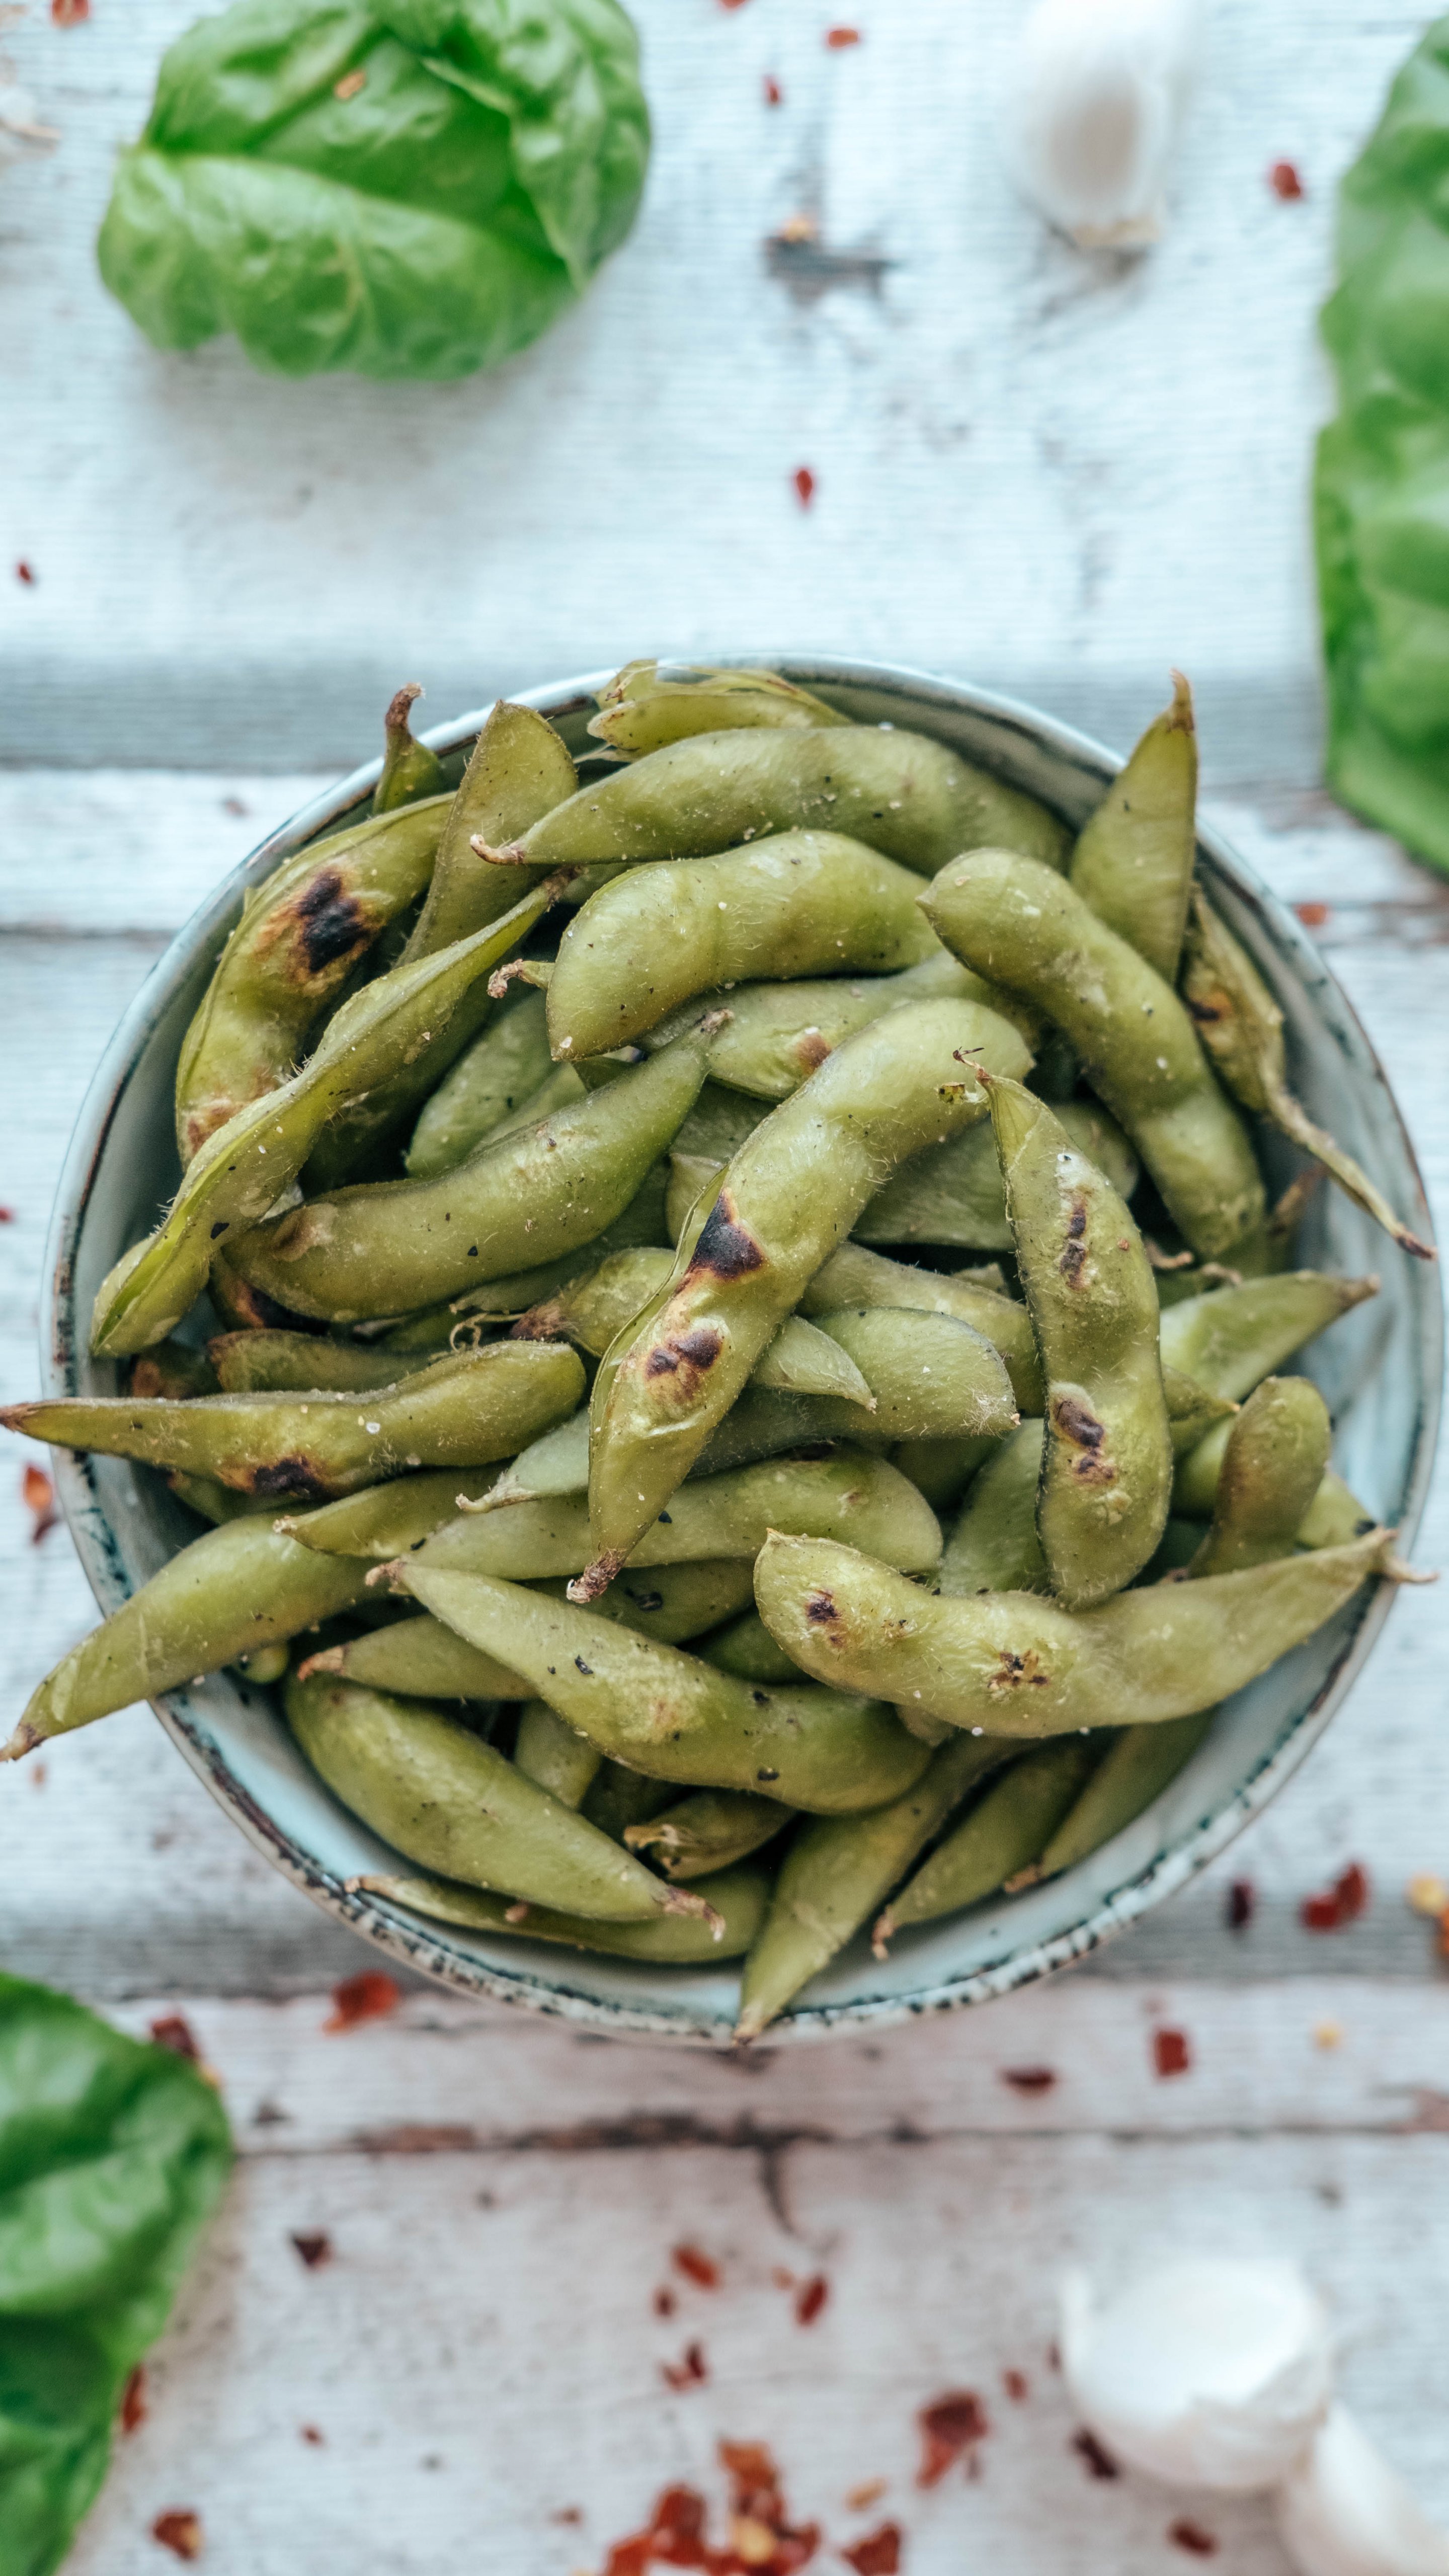 https://www.yuzubakes.com/sites/yuzubakes.com/files/styles/yct_crp_po_min_scale_5120/public/featured-images/delicious-easy-edamame-recipe-served-in-a-bowl-with-garlic-and-chilli.jpg